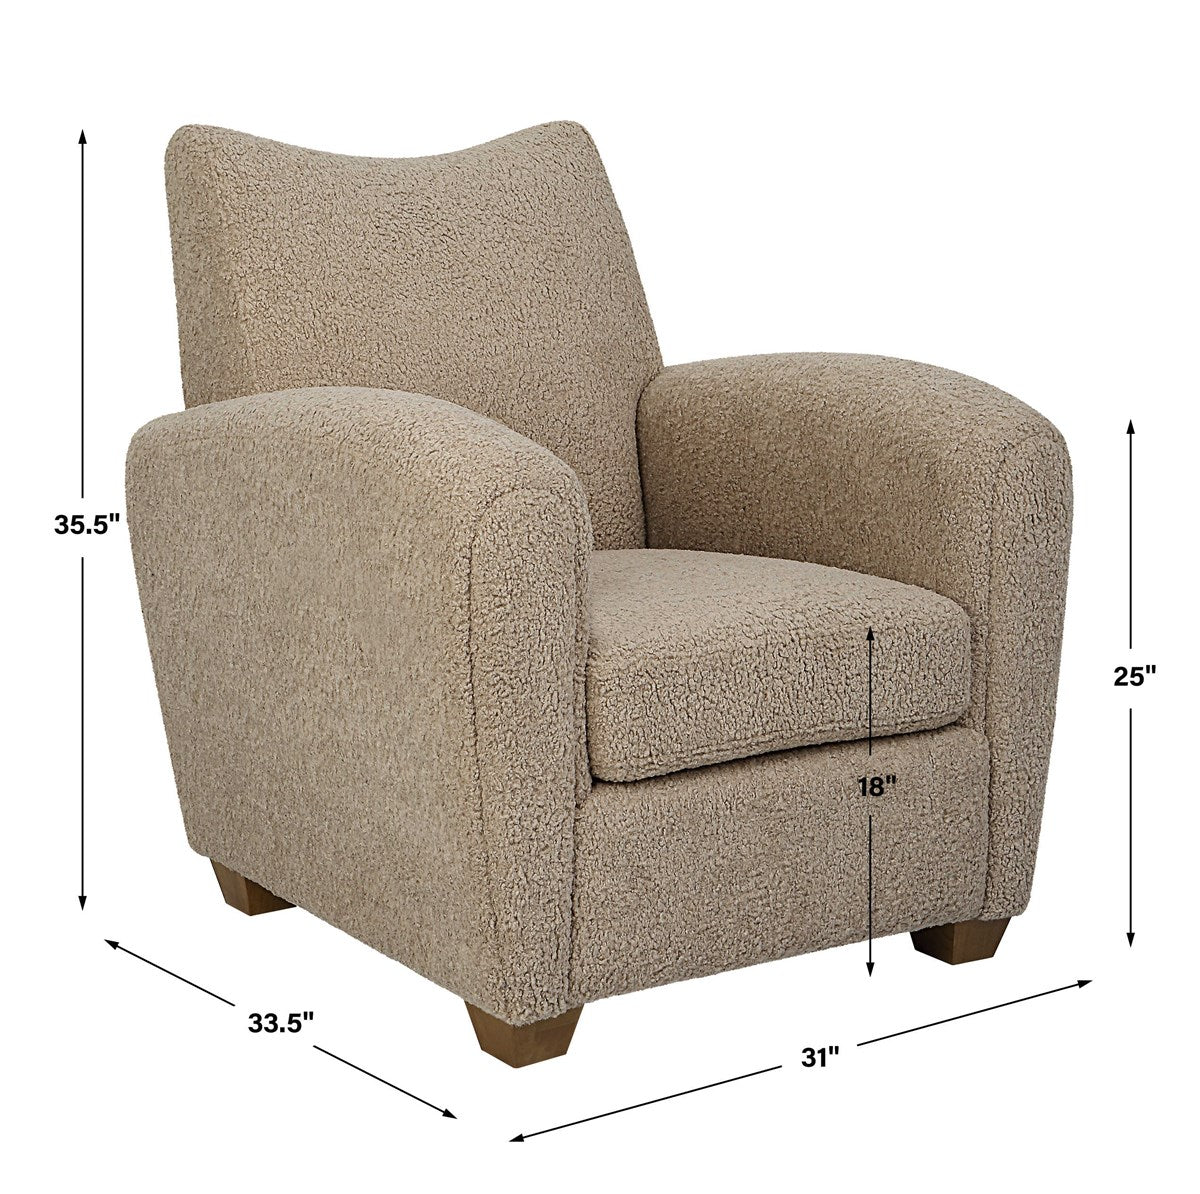 Teddy Accent Chair in Latte